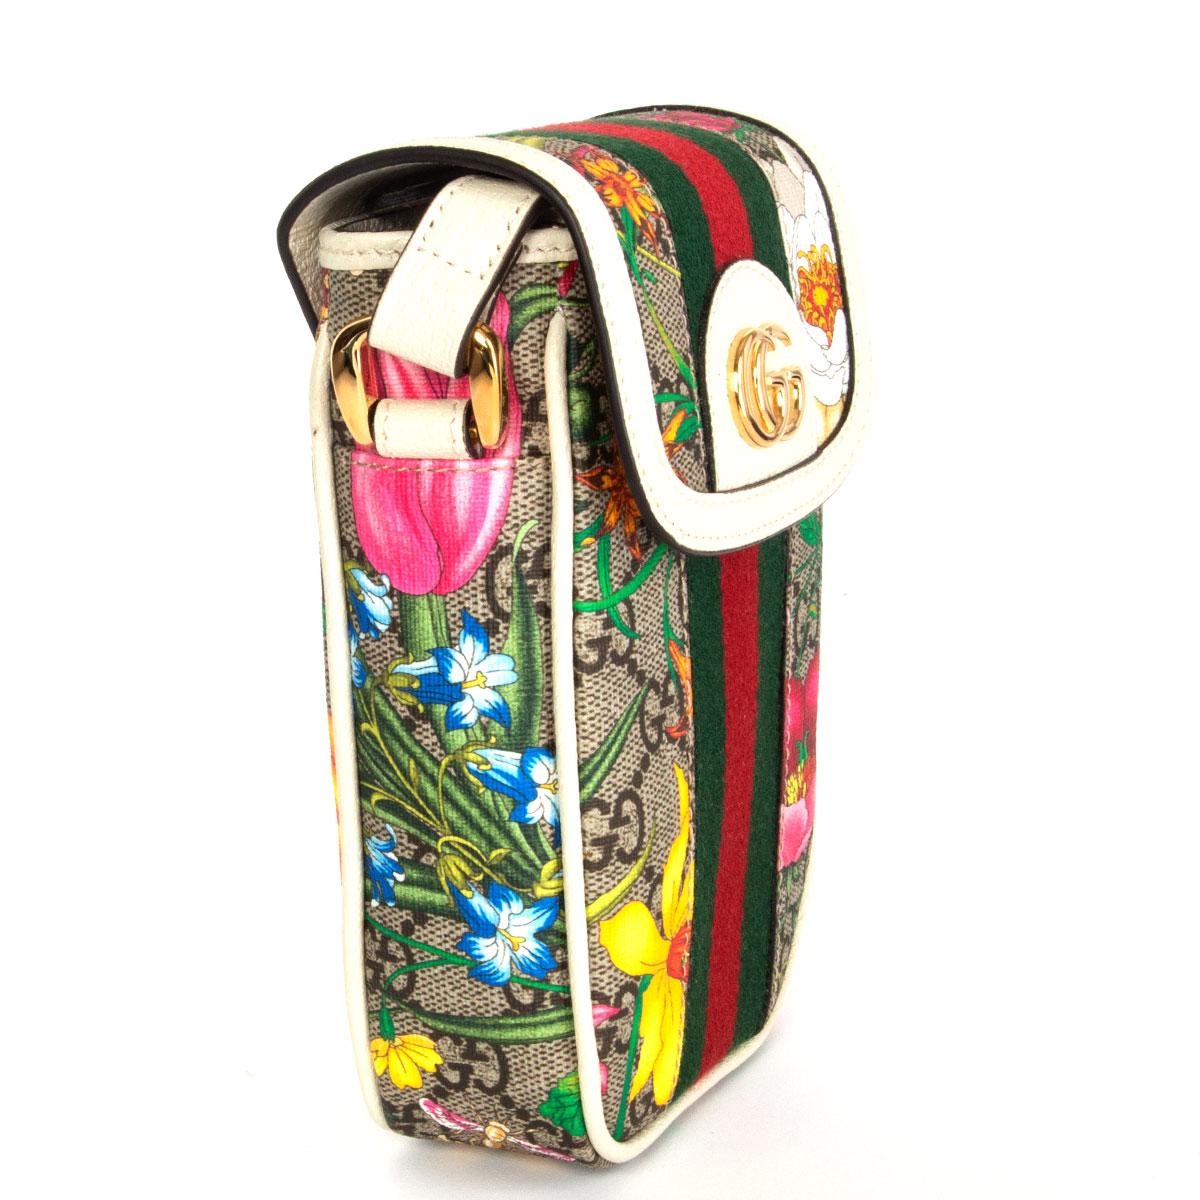 Gucci Ophidia mini phone bag in white leather and multicolored Floral GG Supreme canvas. Features an adjustable shoulder strap, a fold over front flap, a gold tone GG logo, a Web stripe down the front and an all-over Flora pattern. Has been carried